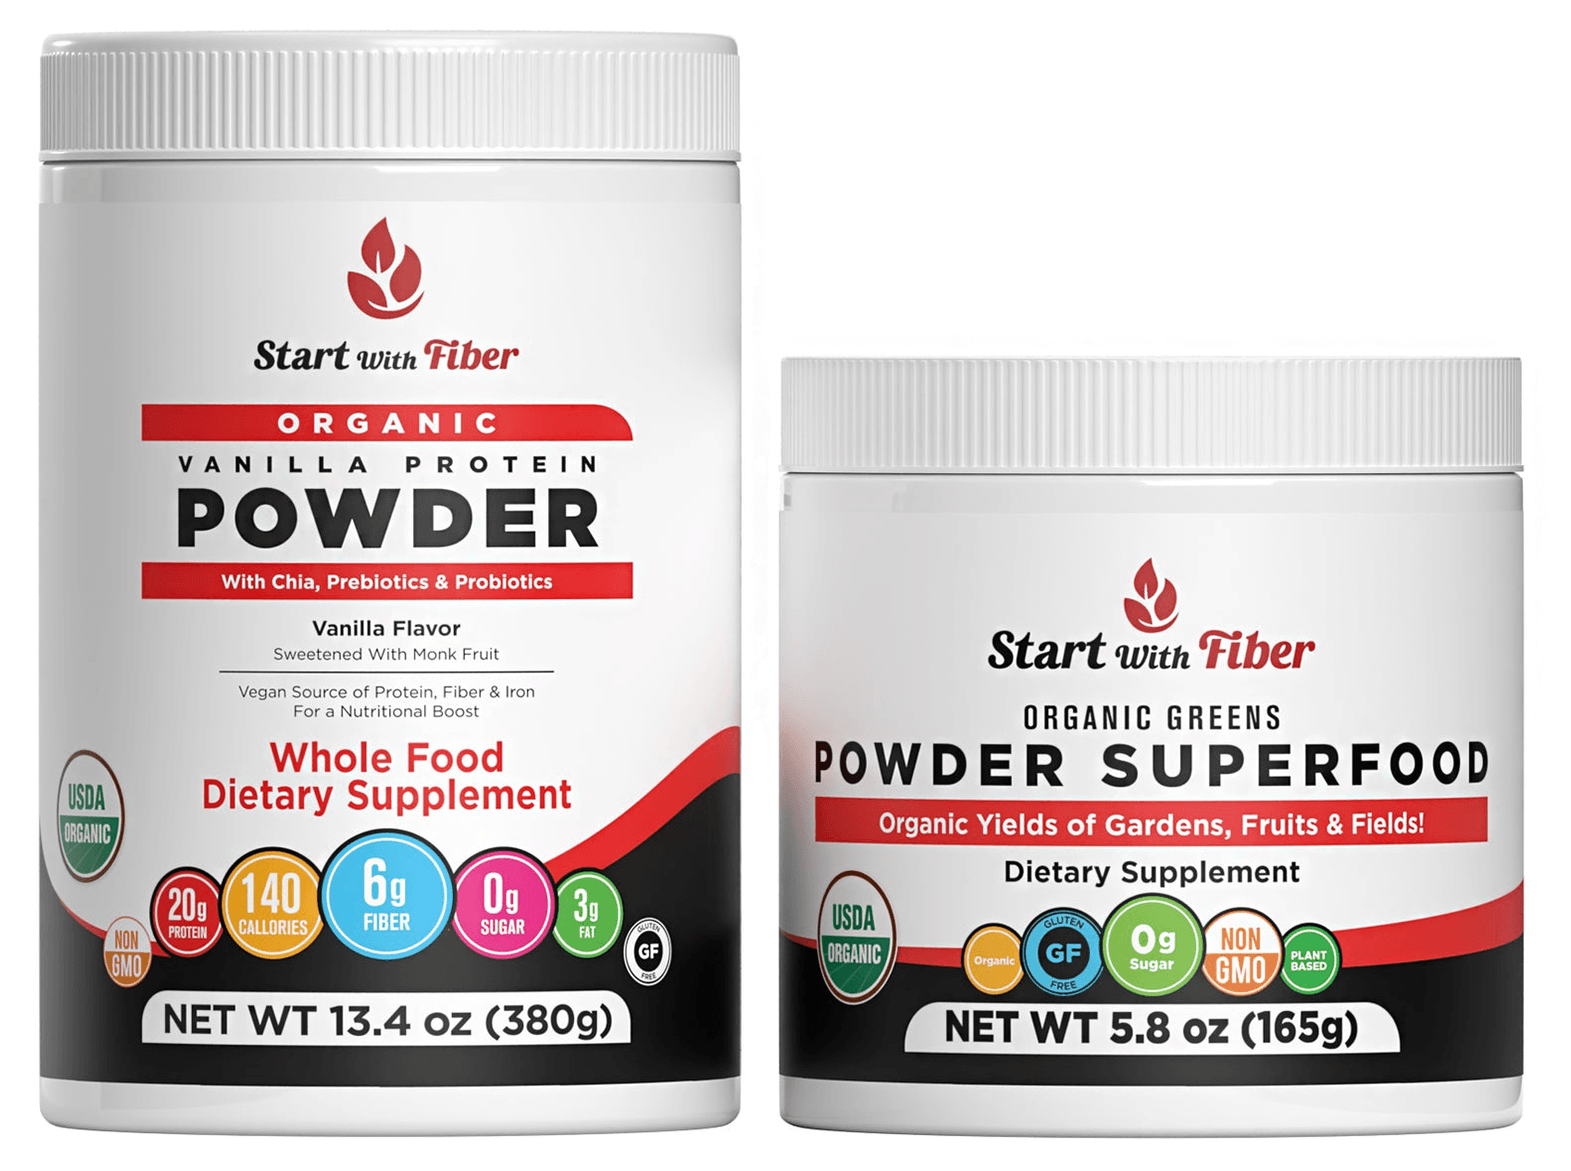 Organic Protein Powder With Organic Greens Powder Superfood Combo - Start with Fiber